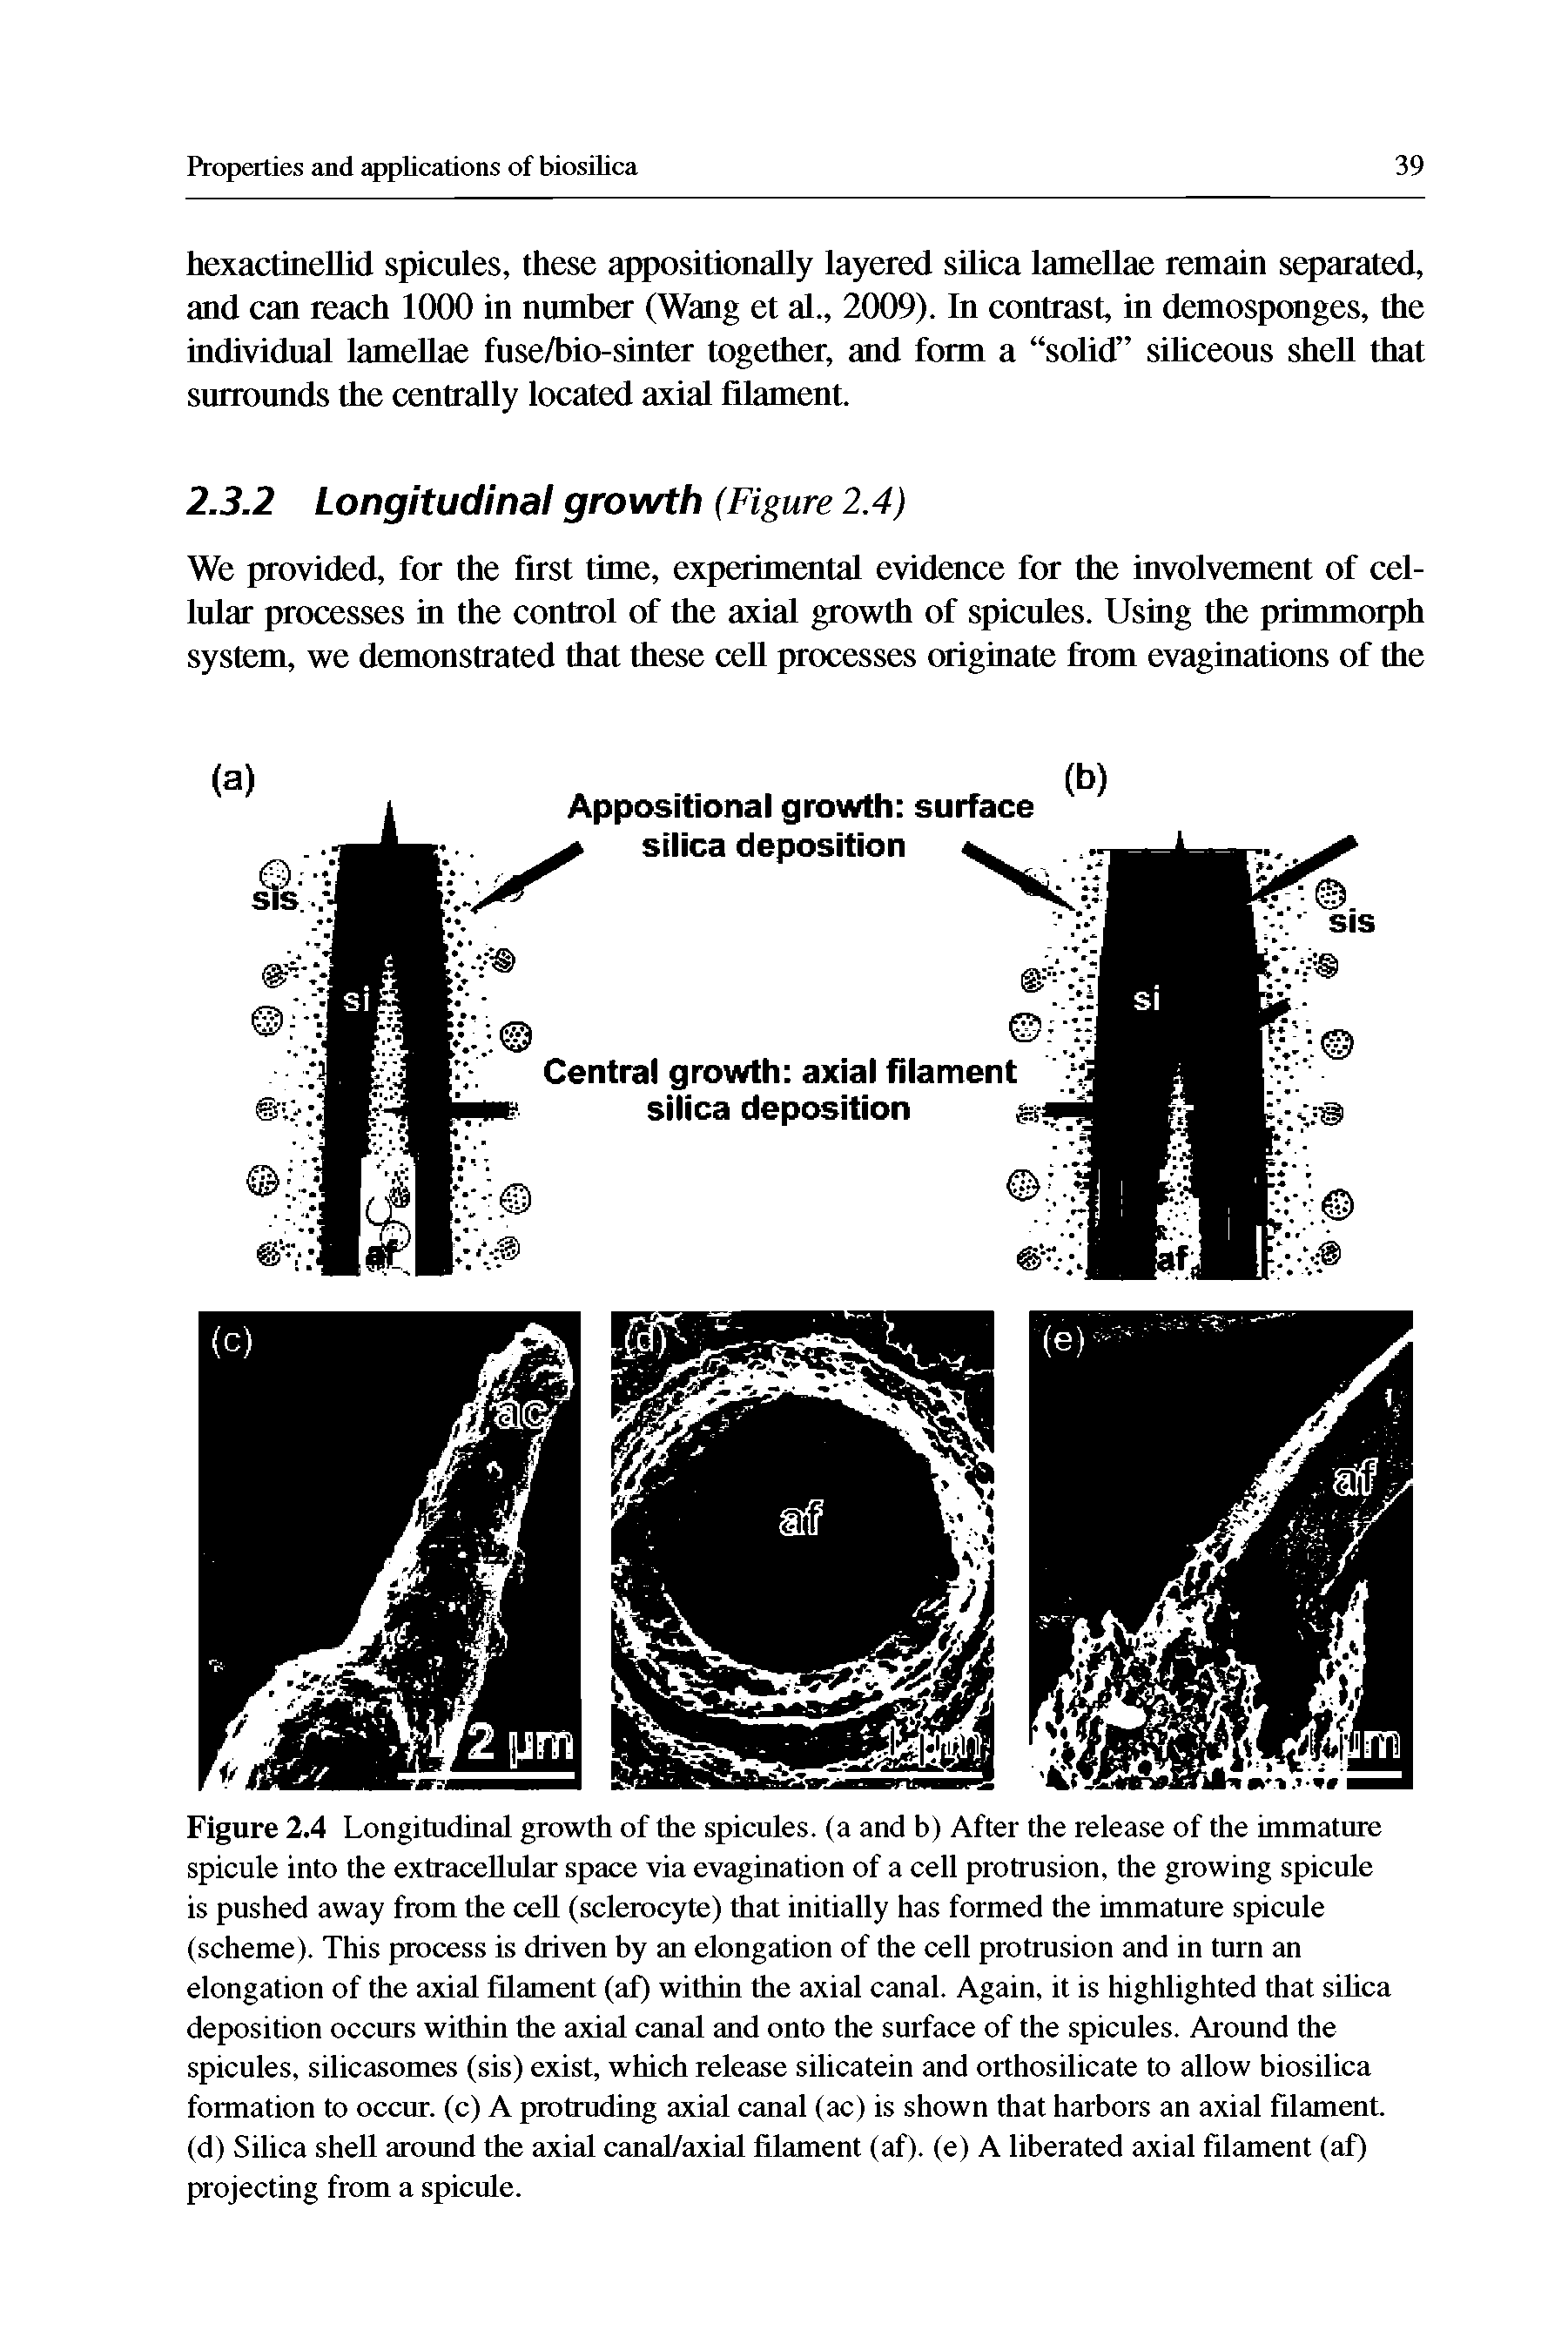 Figure 2.4 Longitudinal growth of the spicules, (a and b) After the release of the immature spicule into the extracellular space via evagination of a cell protrusion, the growing spicule is pushed away from the cell (sclerocyte) that initially has formed the immature spicule (scheme). This process is driven by an elongation of the cell protrusion and in turn an elongation of the axial filament (af) within the axial canal. Again, it is highlighted that sihca deposition occurs within the axial canal and onto the surface of the spicules. Around the spicules, silicasomes (sis) exist, which release silicatein and orthosilicate to allow biosilica formation to occur, (c) A protruding axial canal (ac) is shown that harbors an axial filament (d) Silica shell around the axial canal/axial filament (af). (e) A liberated axial filament (af) projecting from a spicule.